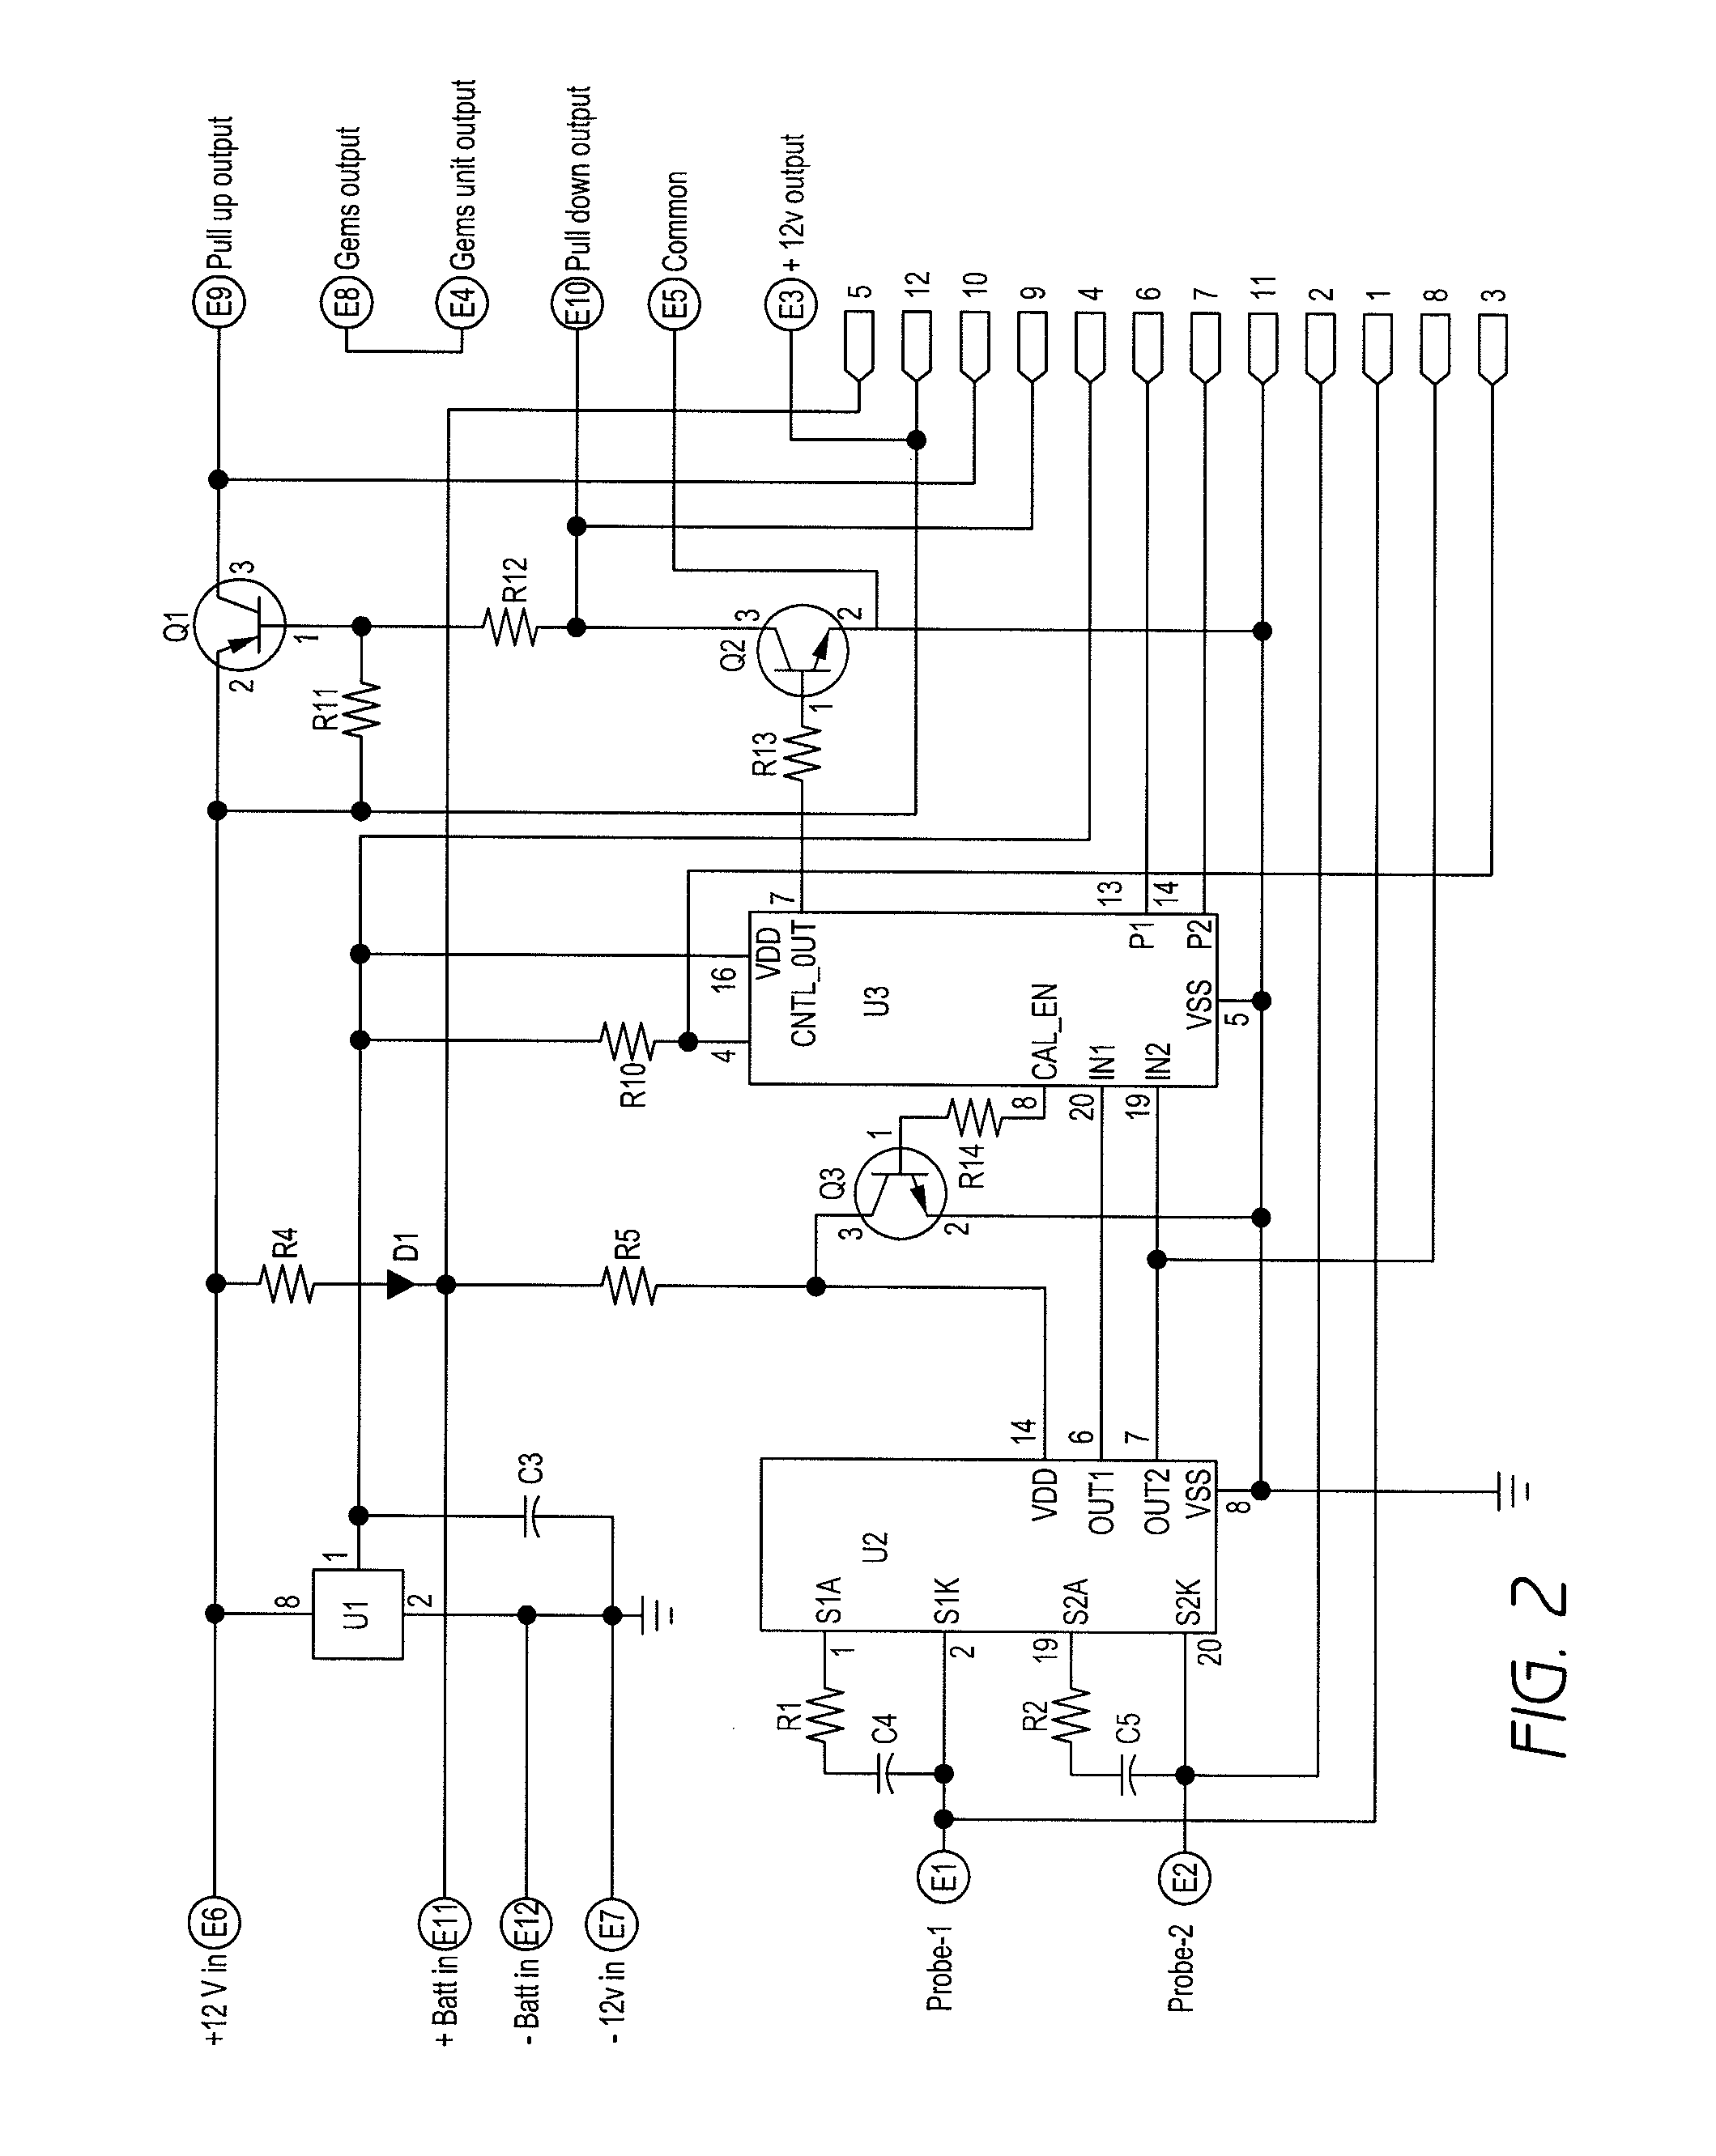 Method and apparatus for sensor calibration in a dewatering system